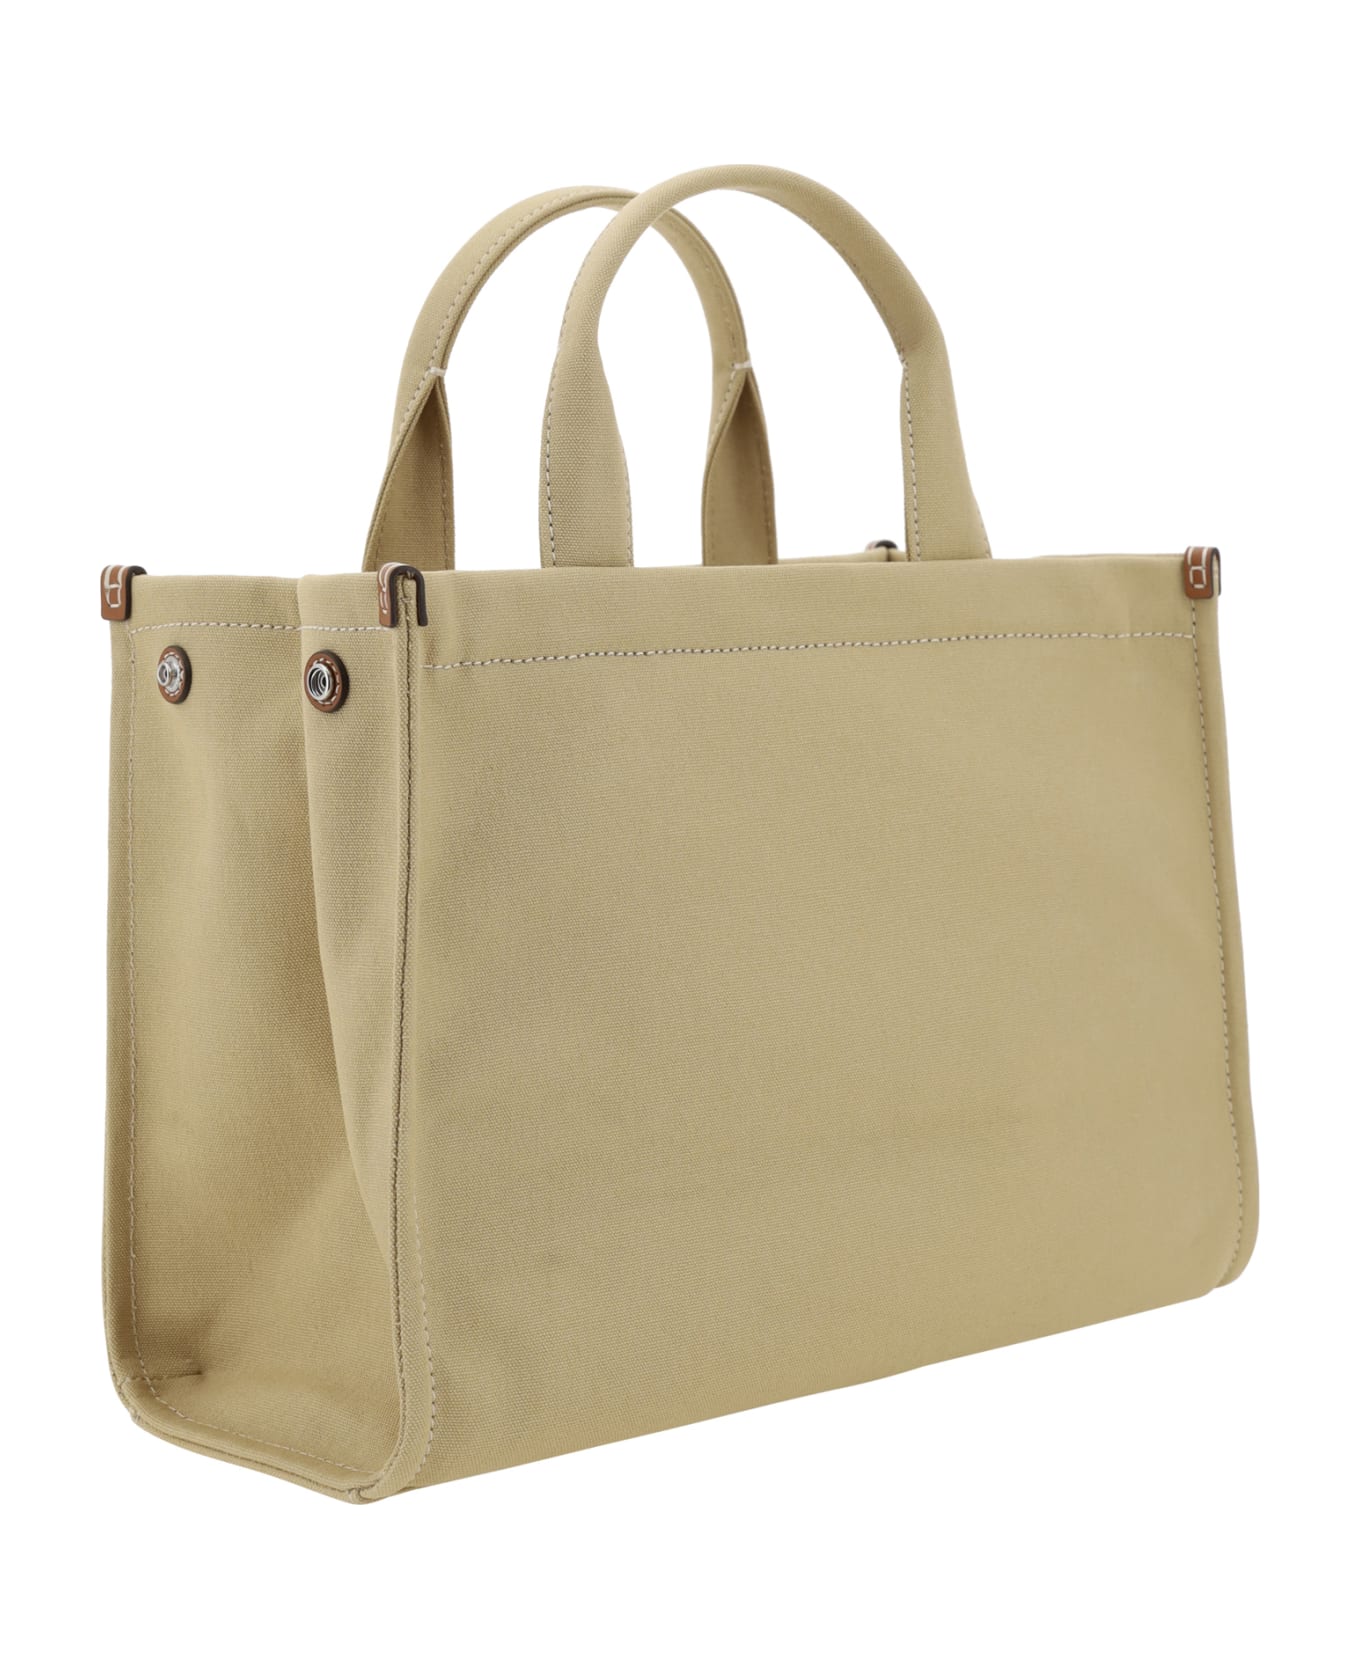 Tory Burch Tote - Hickory